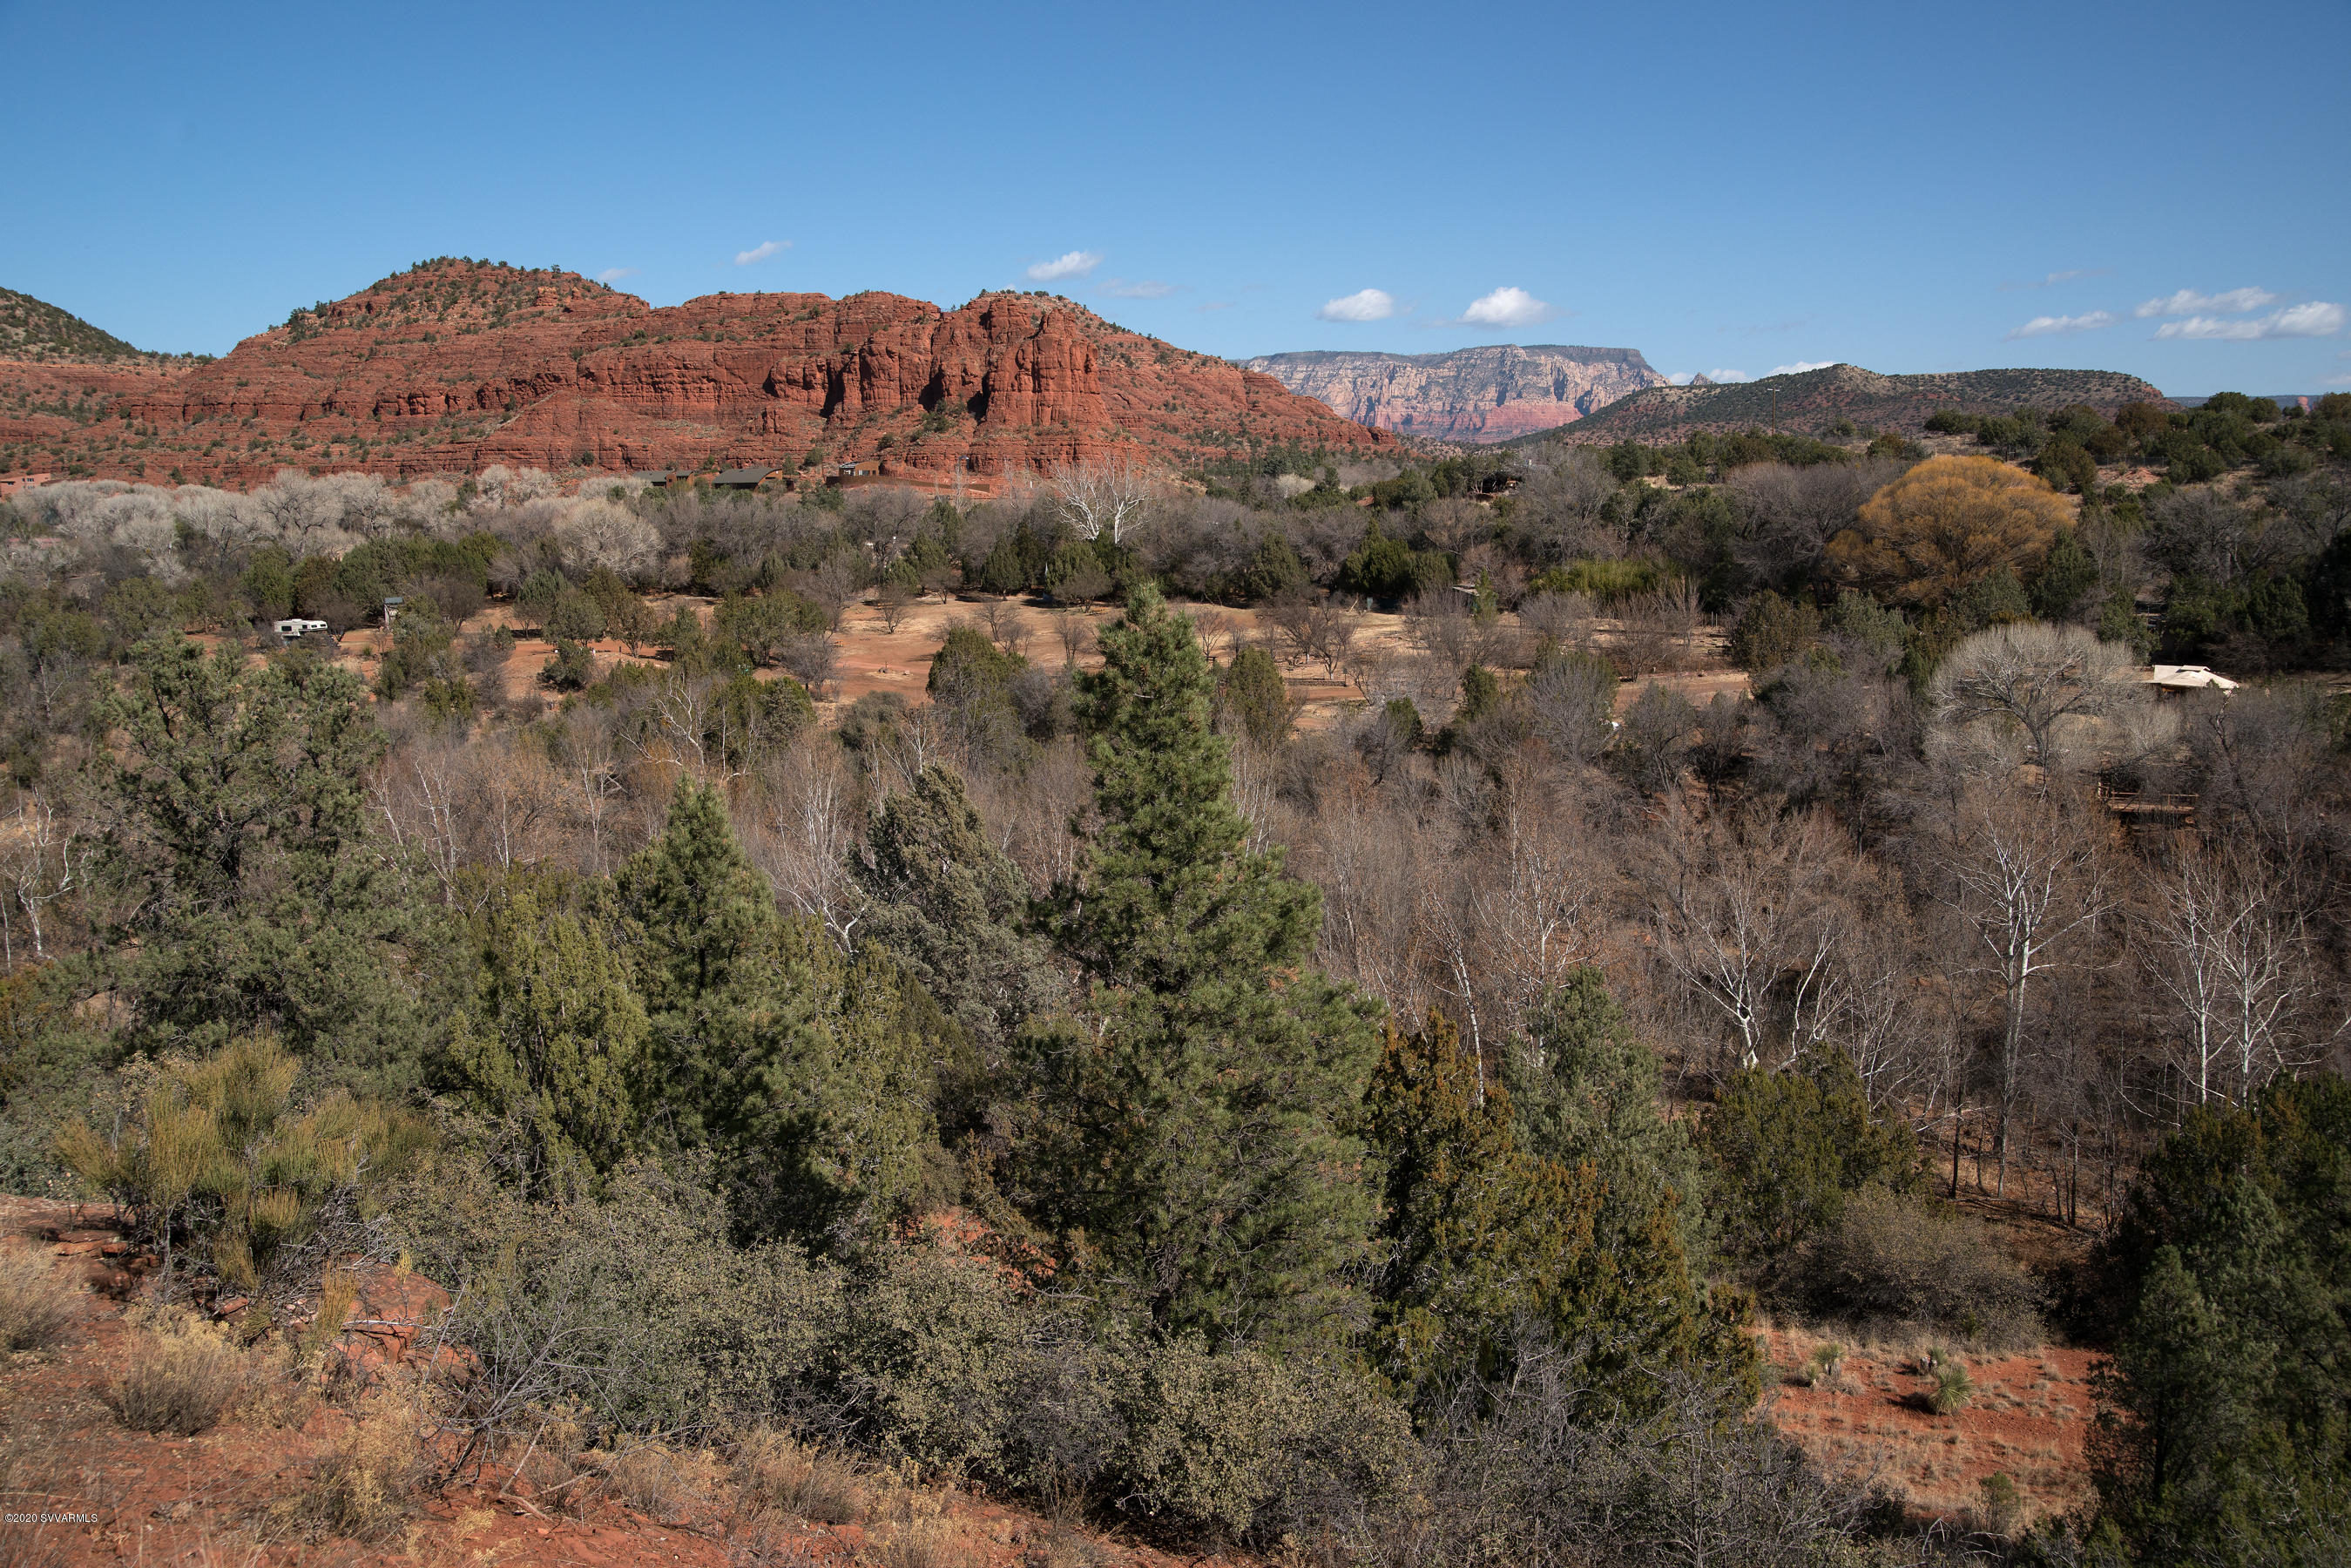 12.75 Acre Metes & Bounds Sedona Home Listings - eXp Realty Sedona Real Estate